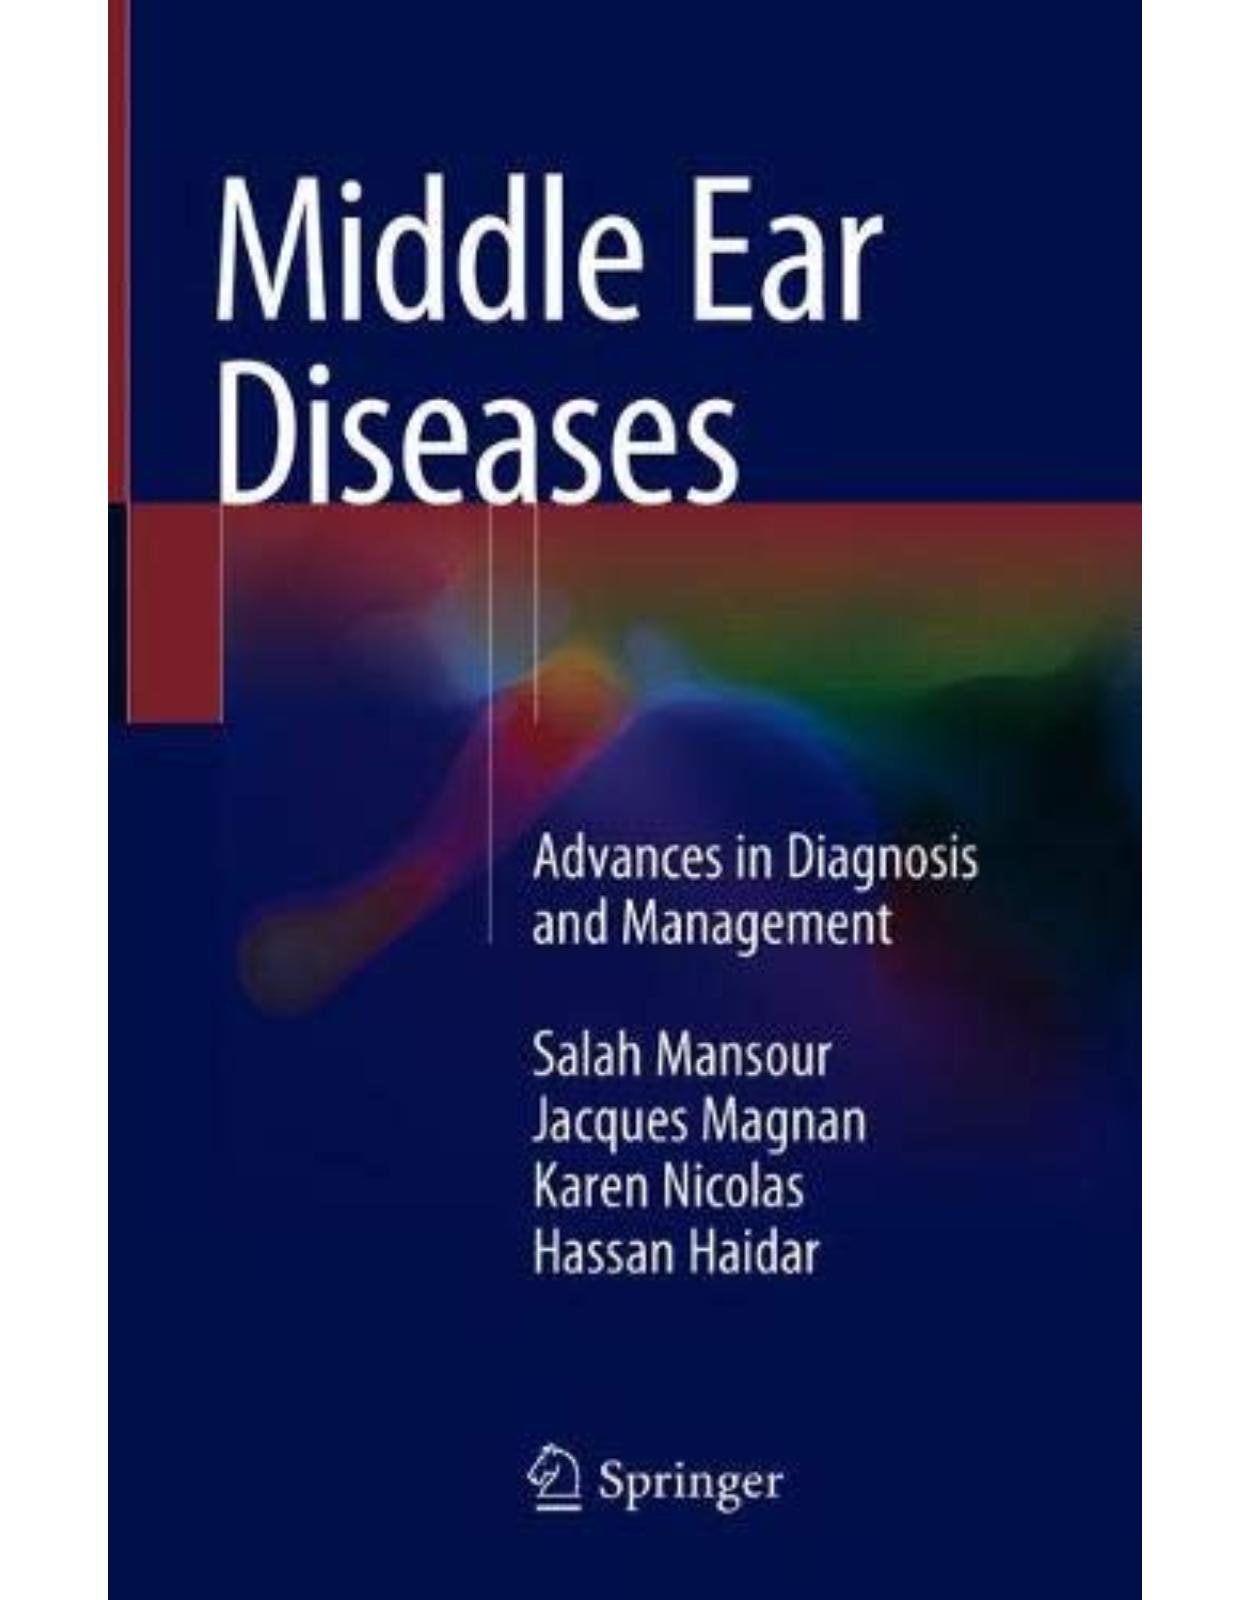 Middle Ear Diseases: Advances in Diagnosis and Management